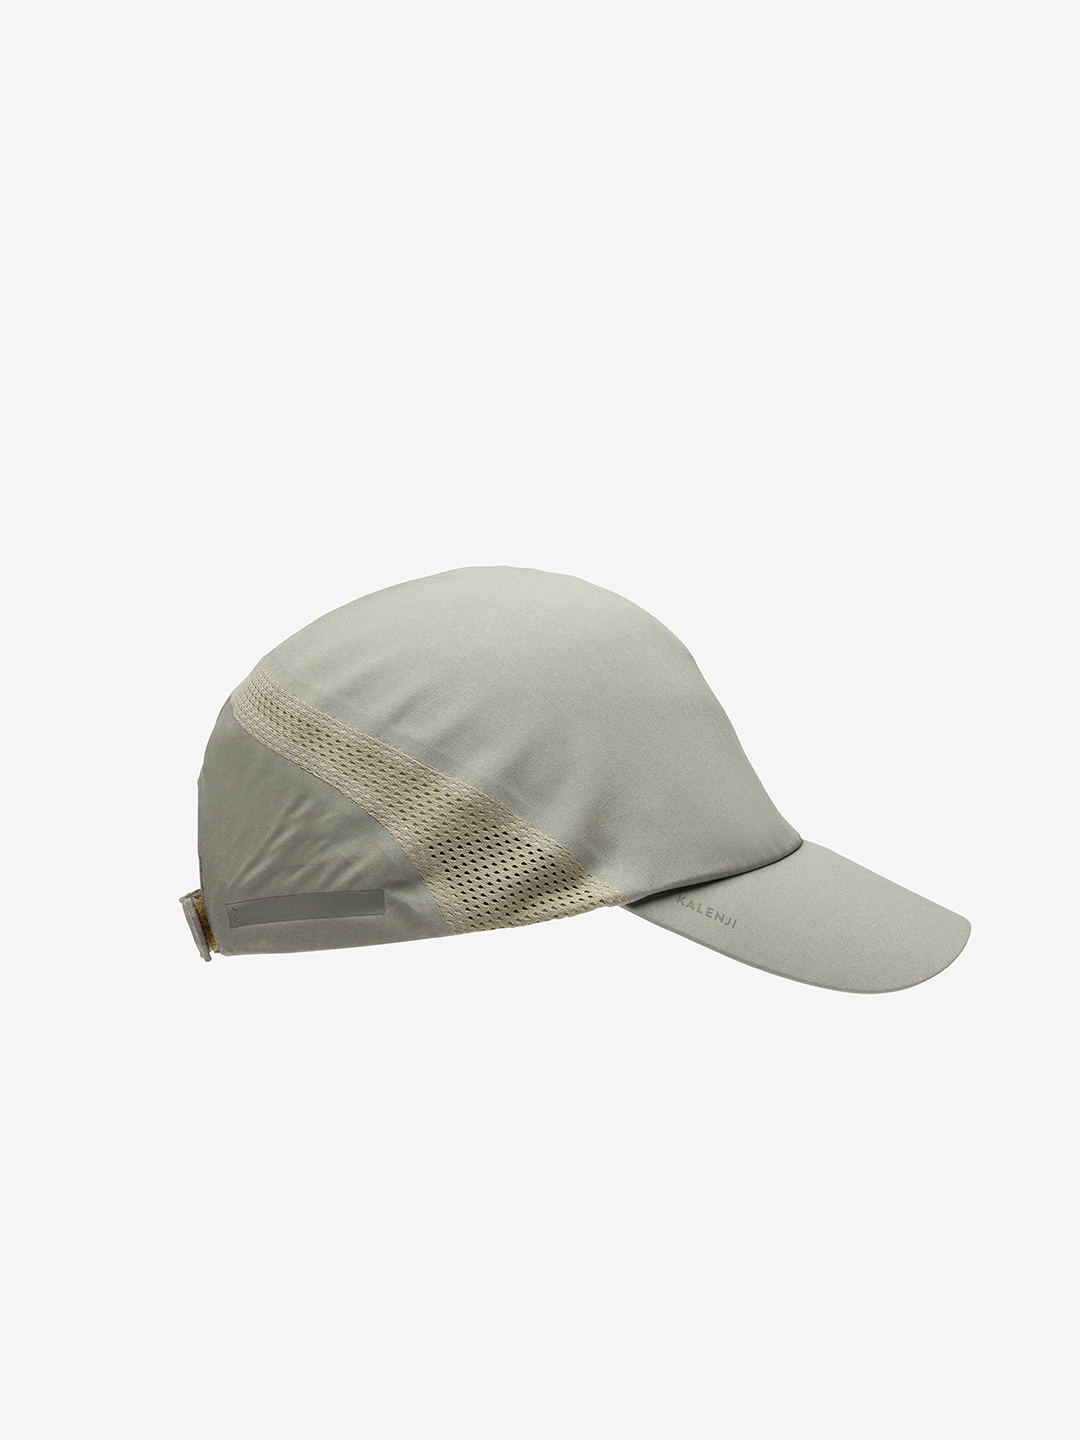 Kalenji By Decathlon Unisex Grey Embroidered Baseball Cap Price in India